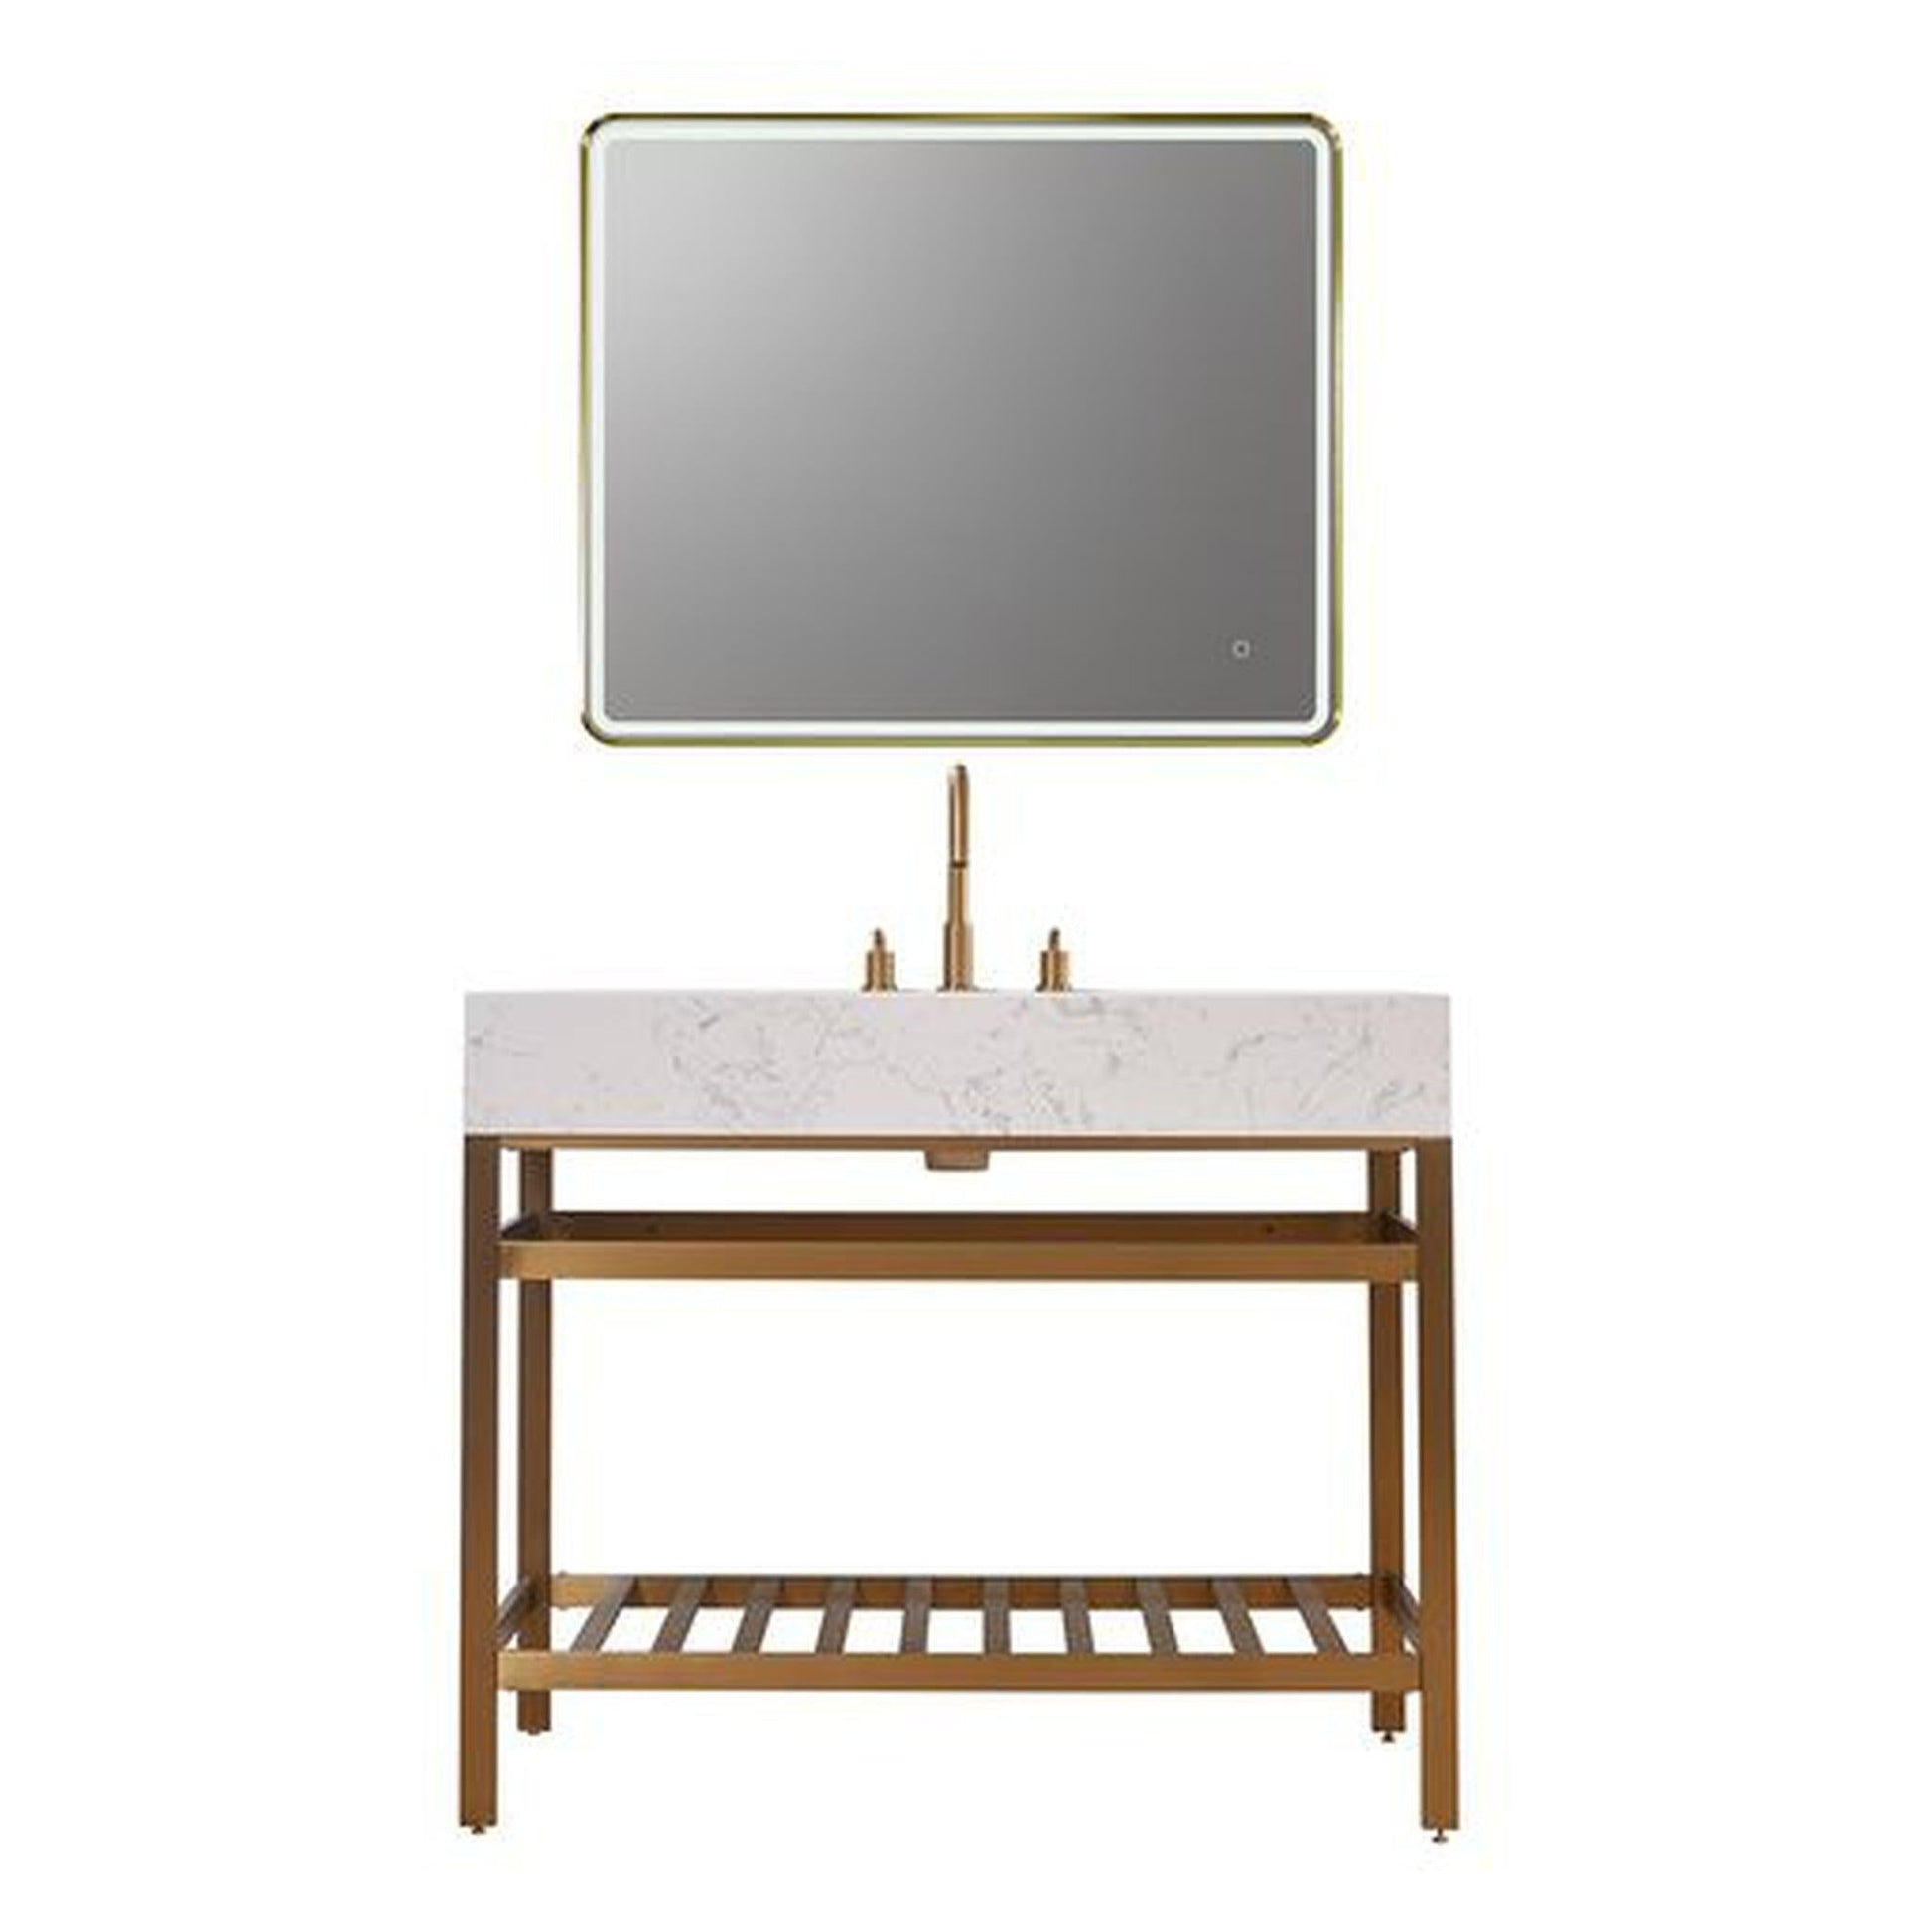 Altair Merano 42" Brushed Gold Single Stainless Steel Bathroom Vanity Set Console With Mirror, Aosta White Stone Top, Single Rectangular Undermount Ceramic Sink, and Safety Overflow Hole